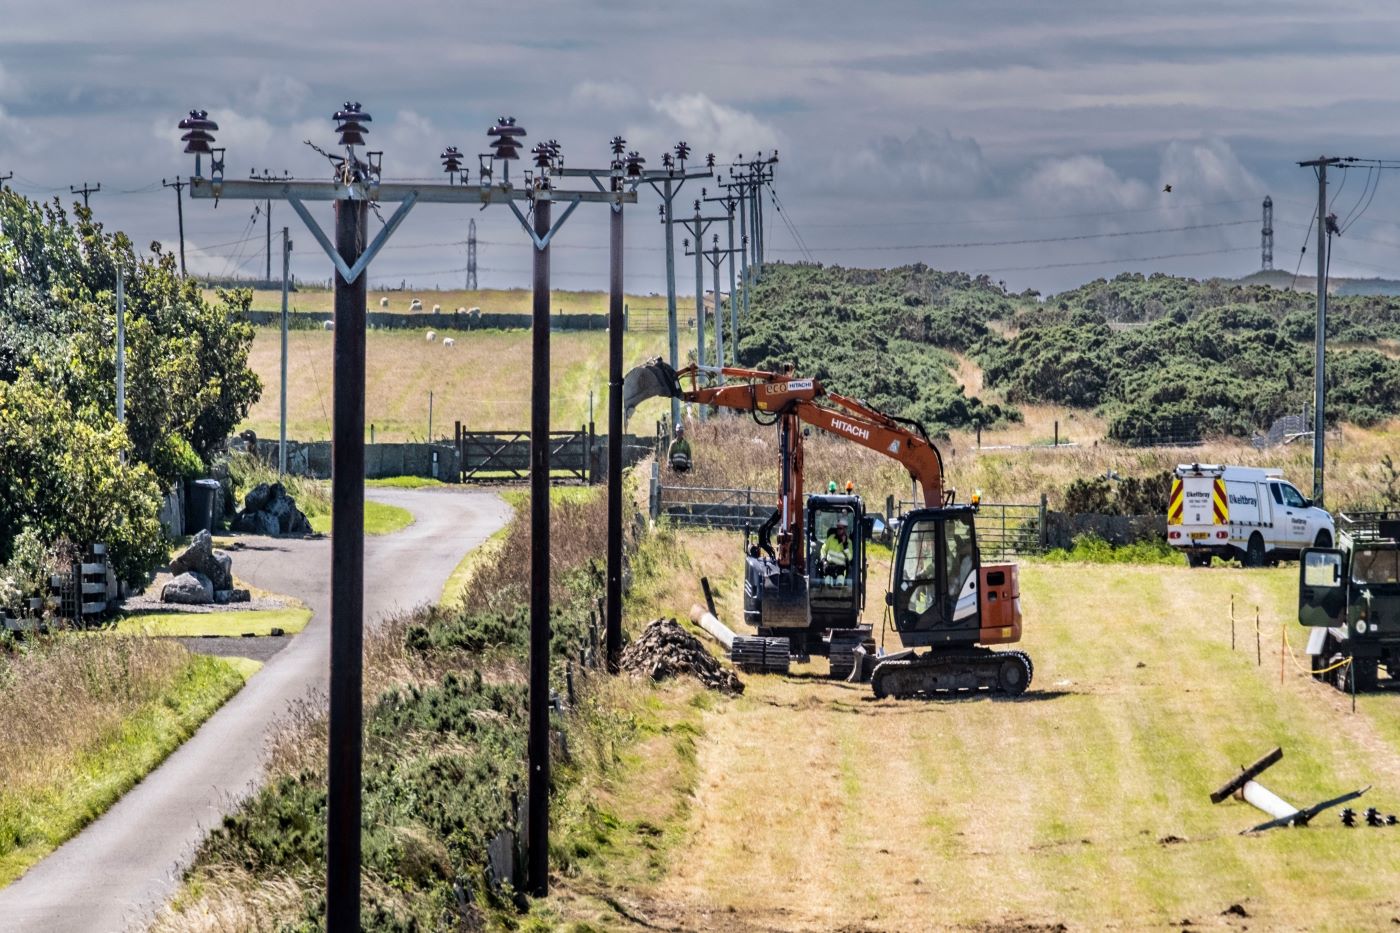 Works on the replacement power line between Dounreay and Melvich; a row of poles and a digger working at a safe distance